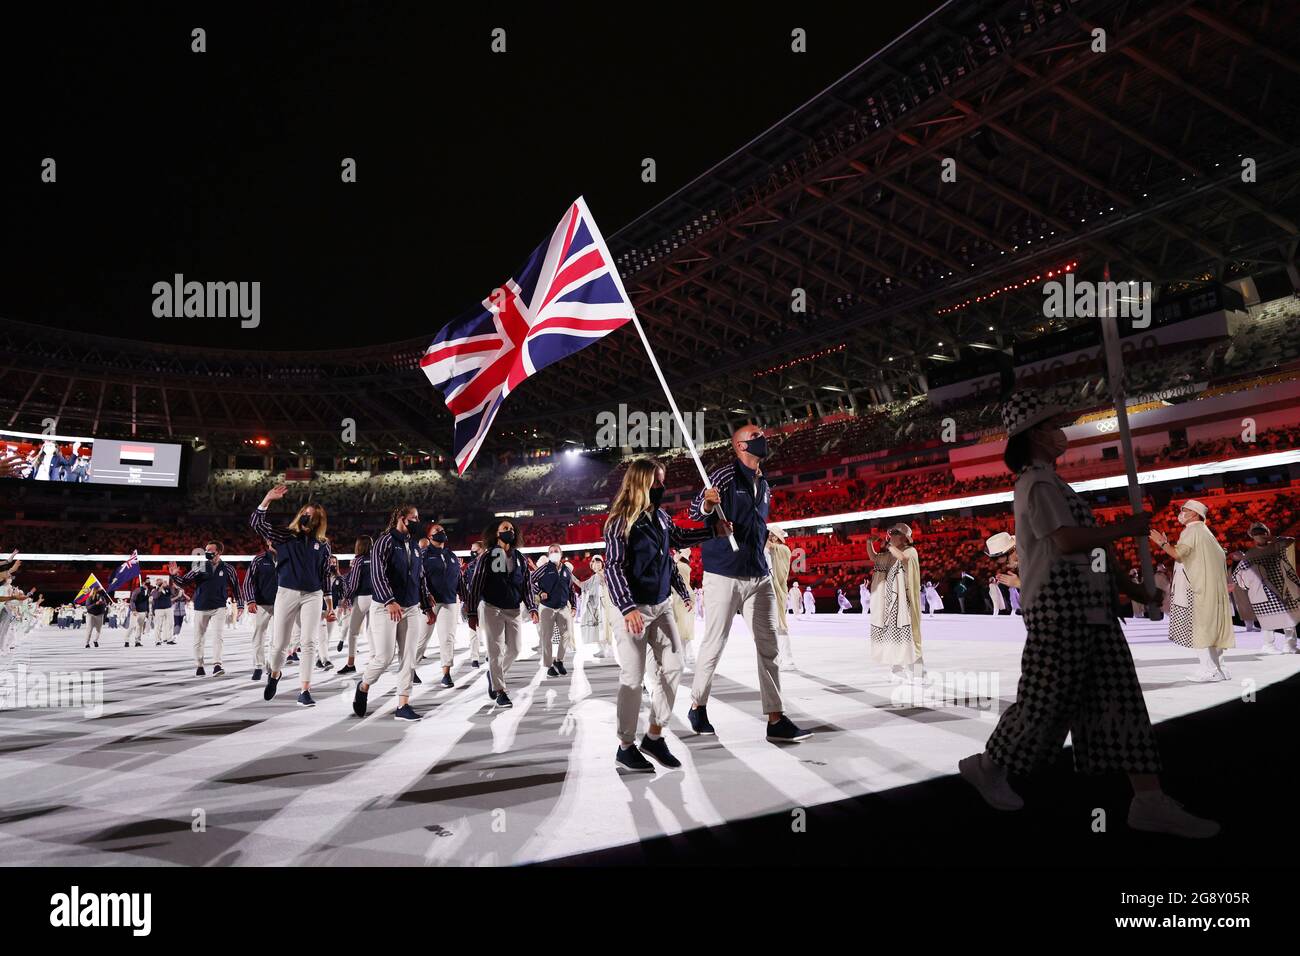 Tokyo, Japan. 23rd July, 2021. Olympic delegation of Great Britain parade into the Olympic Stadium during the opening ceremony of Tokyo 2020 Olympic Games in Tokyo, Japan, July 23, 2021. Credit: Li Ming/Xinhua/Alamy Live News Stock Photo